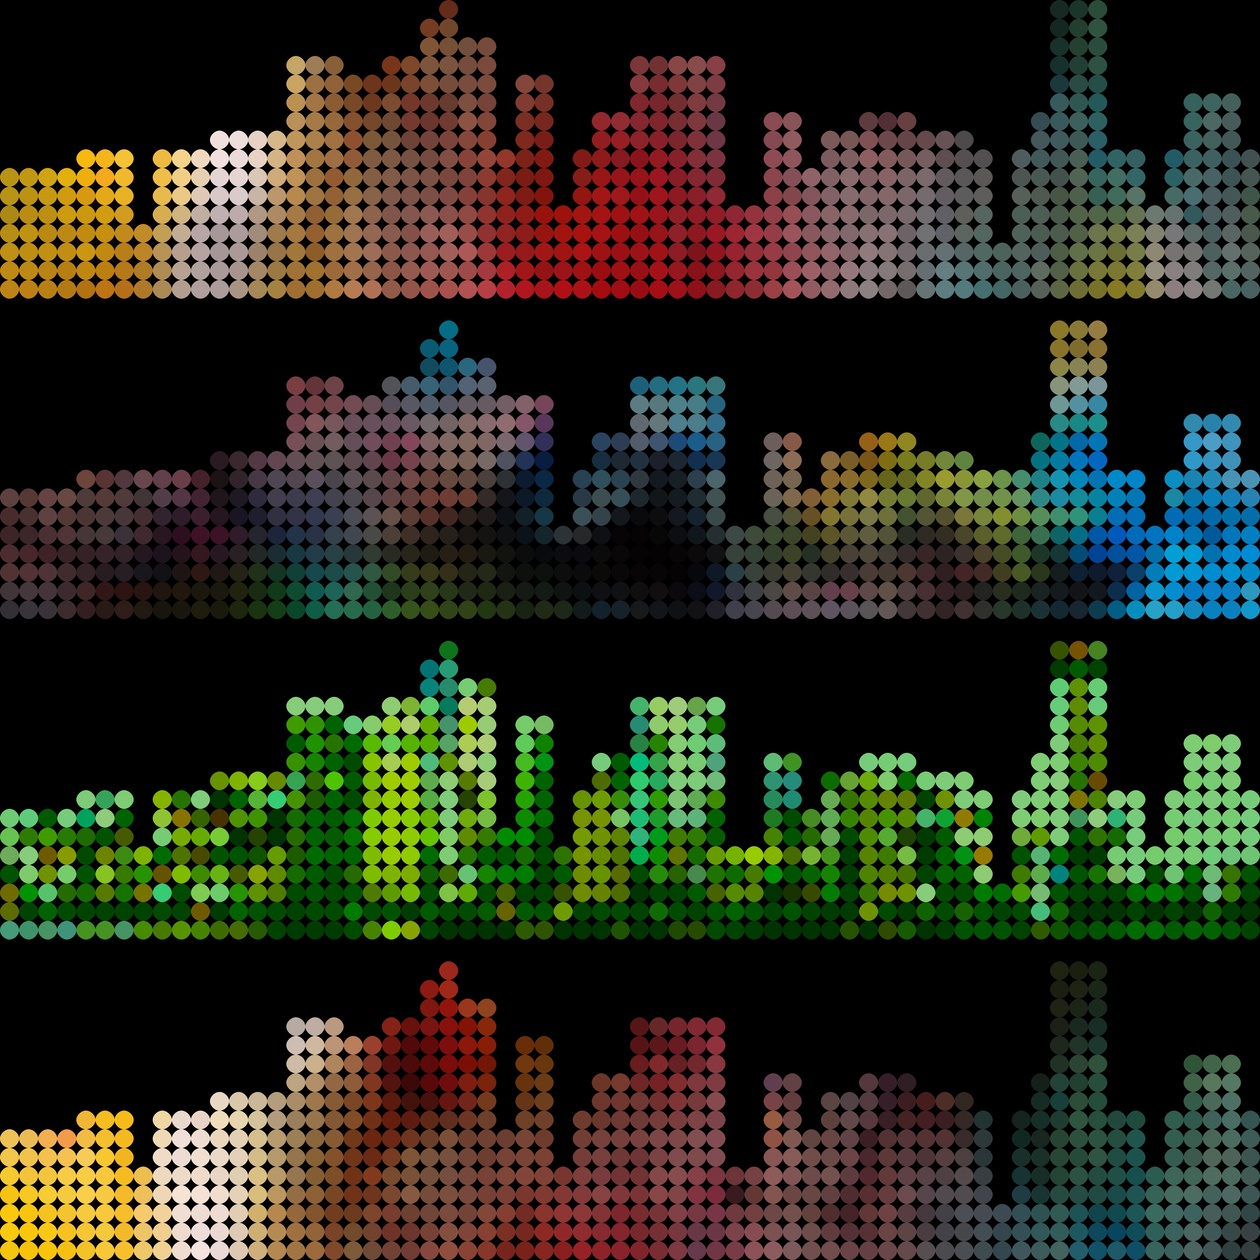 abstract colorful dot style city building pattern background Photoshop brush